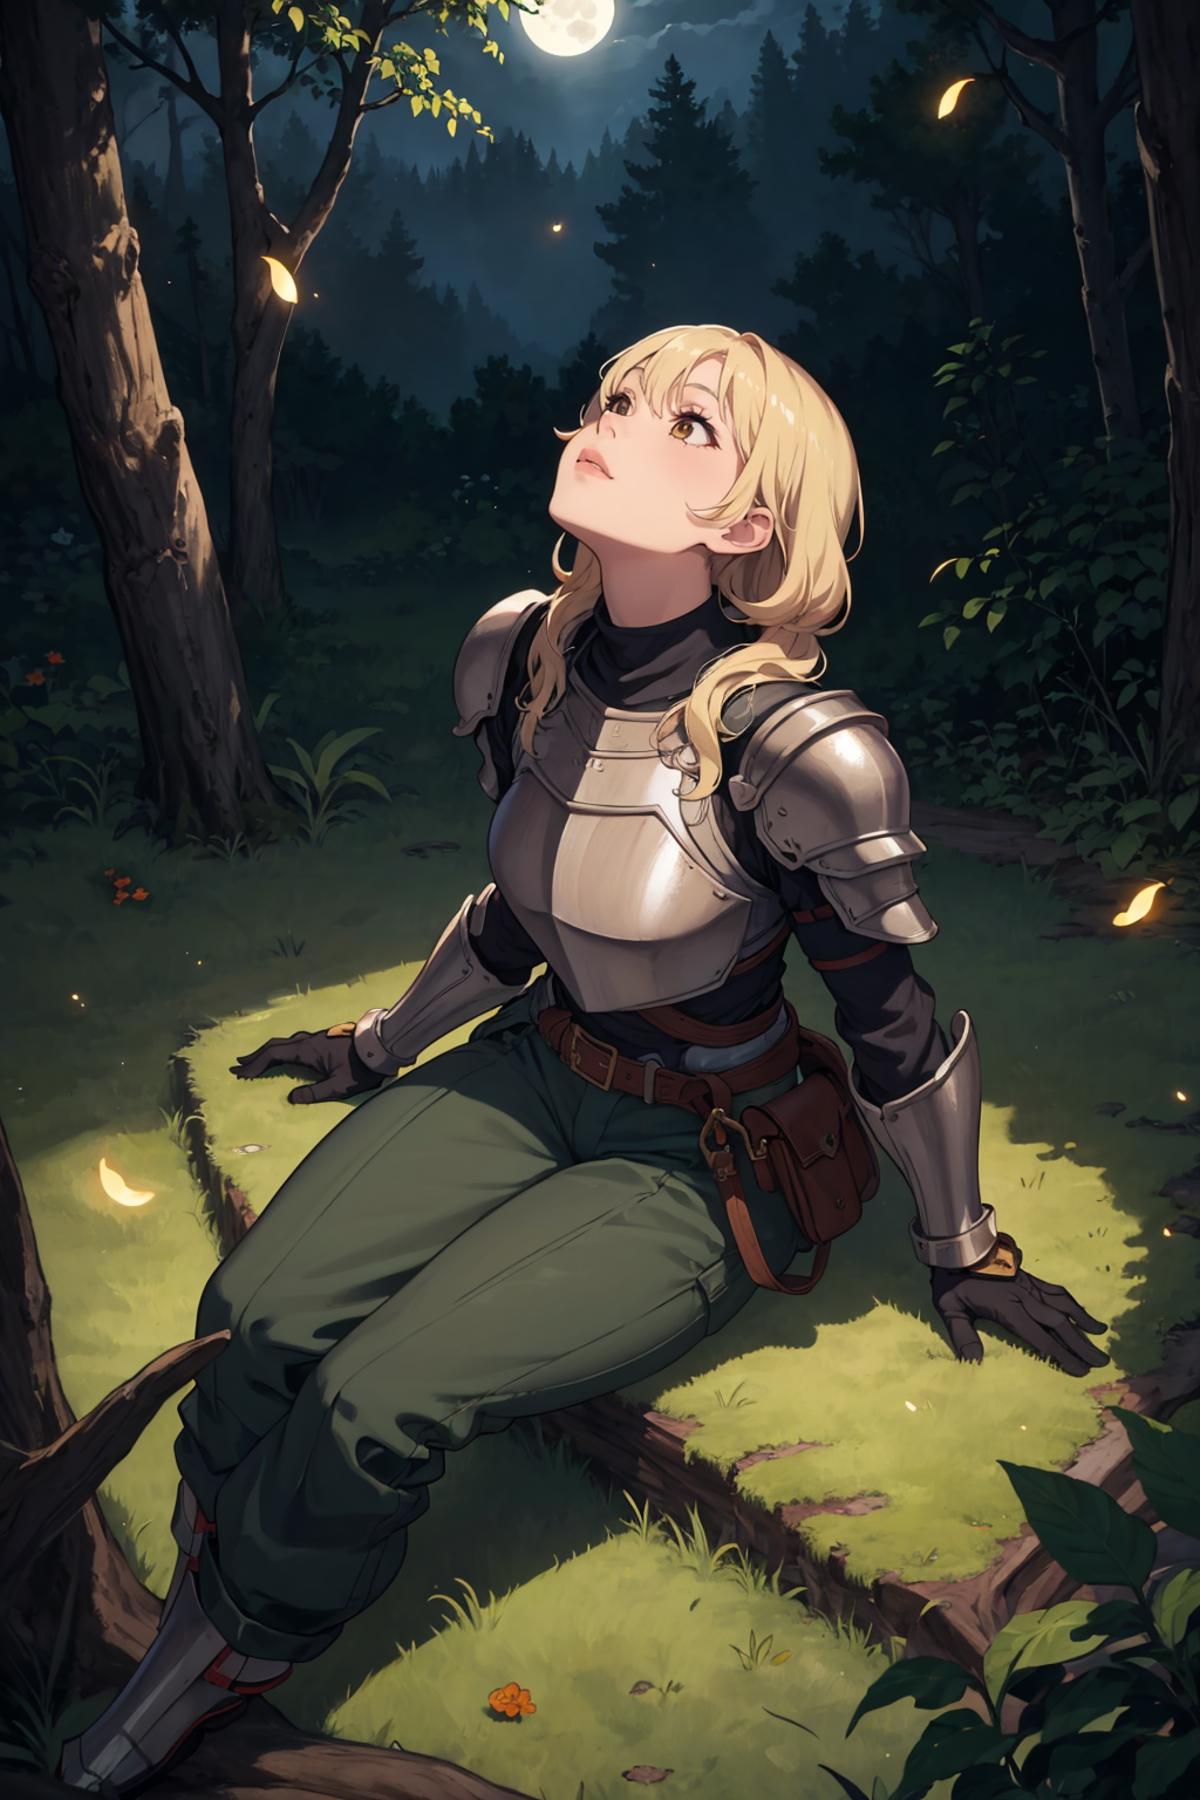 A Cartoon Woman in Armor Sitting in a Forest.